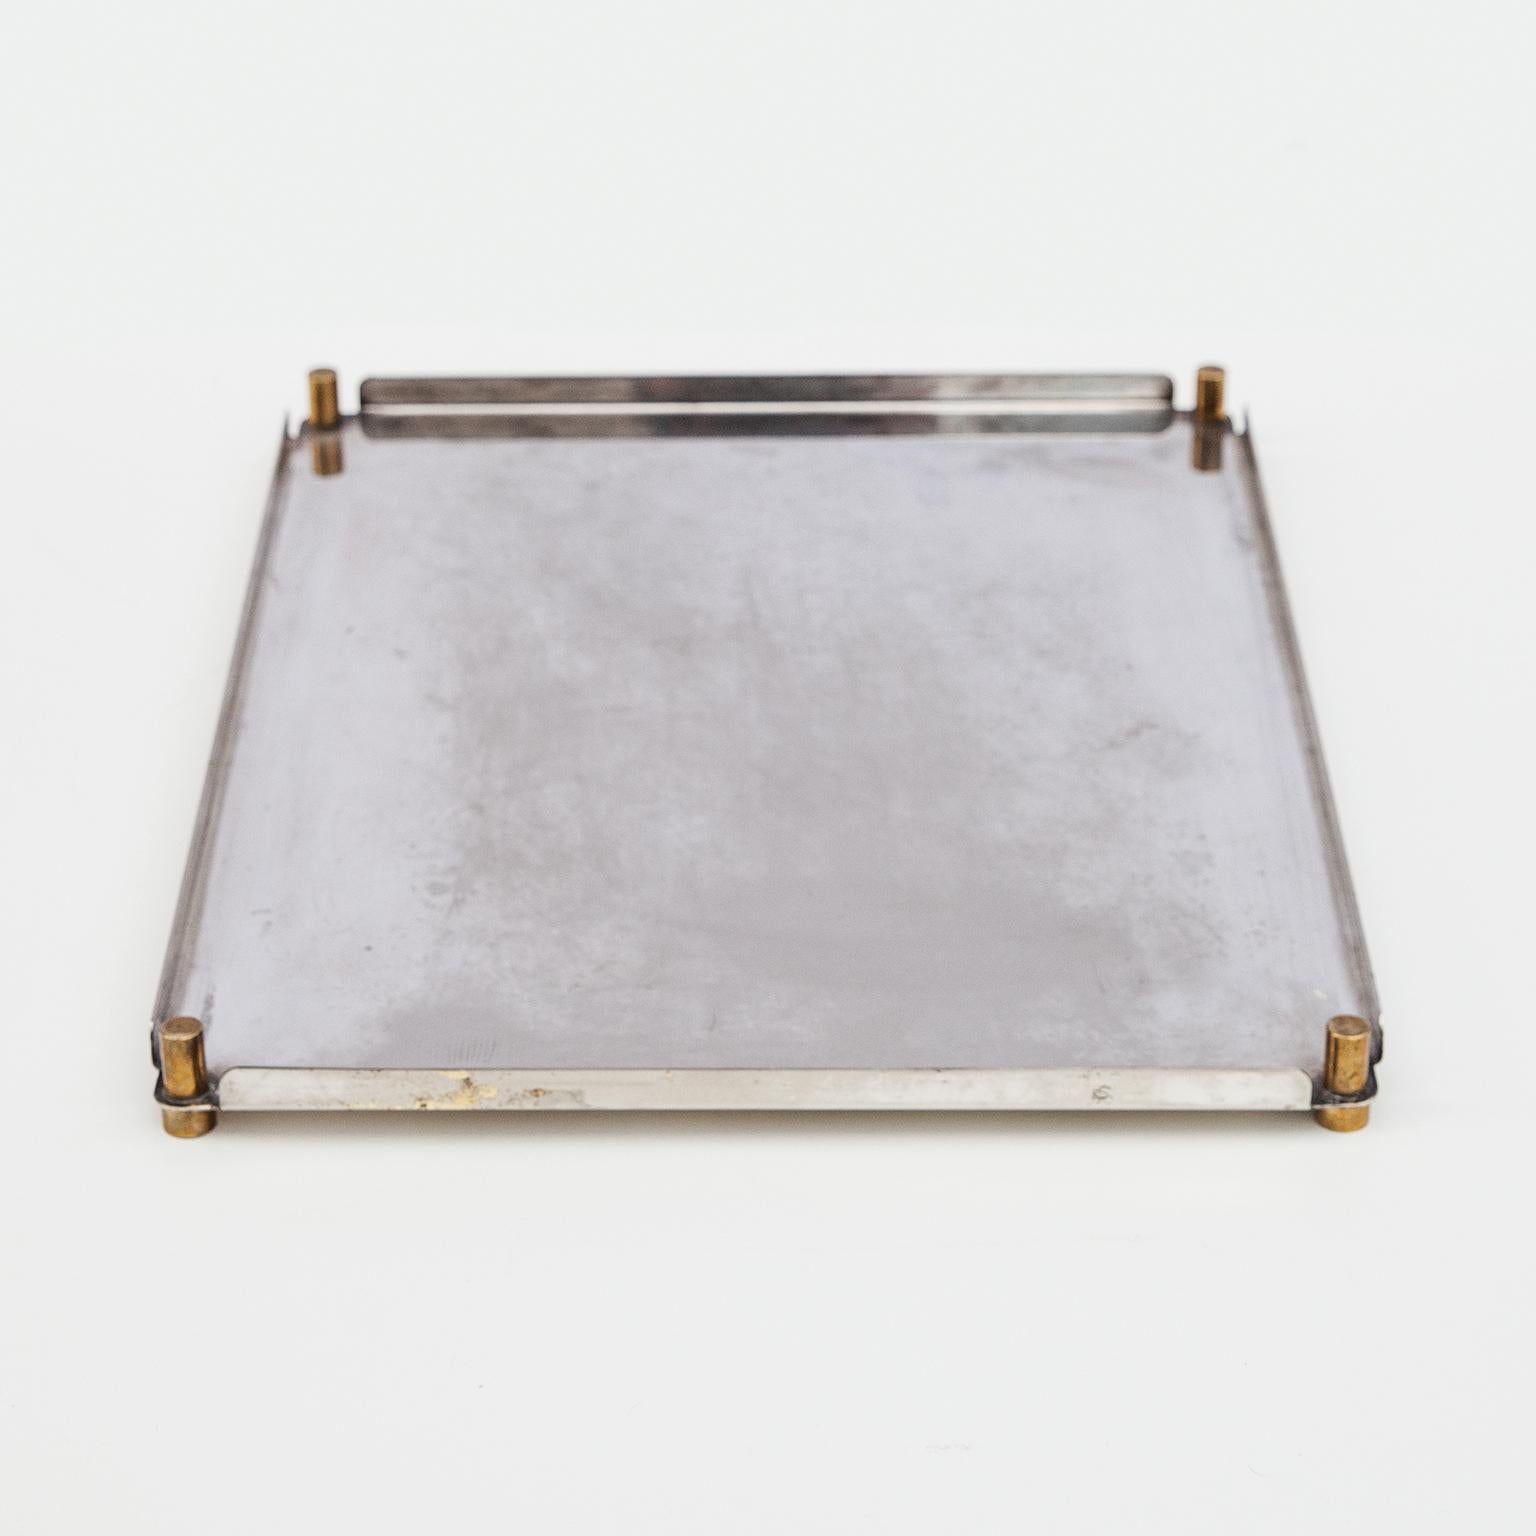 Italian Ettore Sottsass Silver Plated Tray 1990s Signed